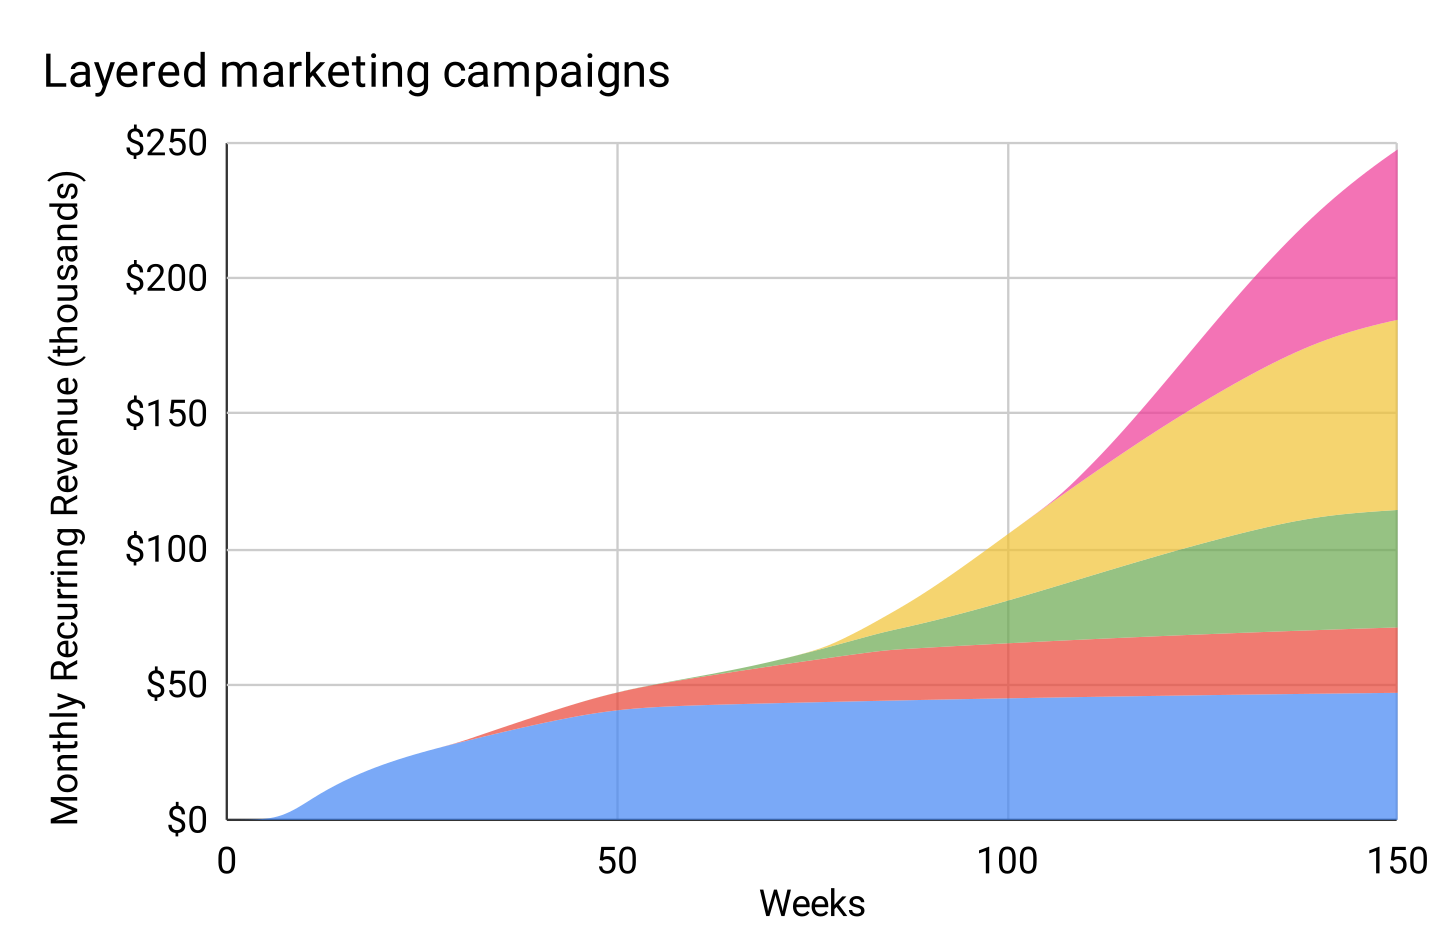 https://longform.asmartbear.com/exponential-growth/Layered marketing campaigns.svg